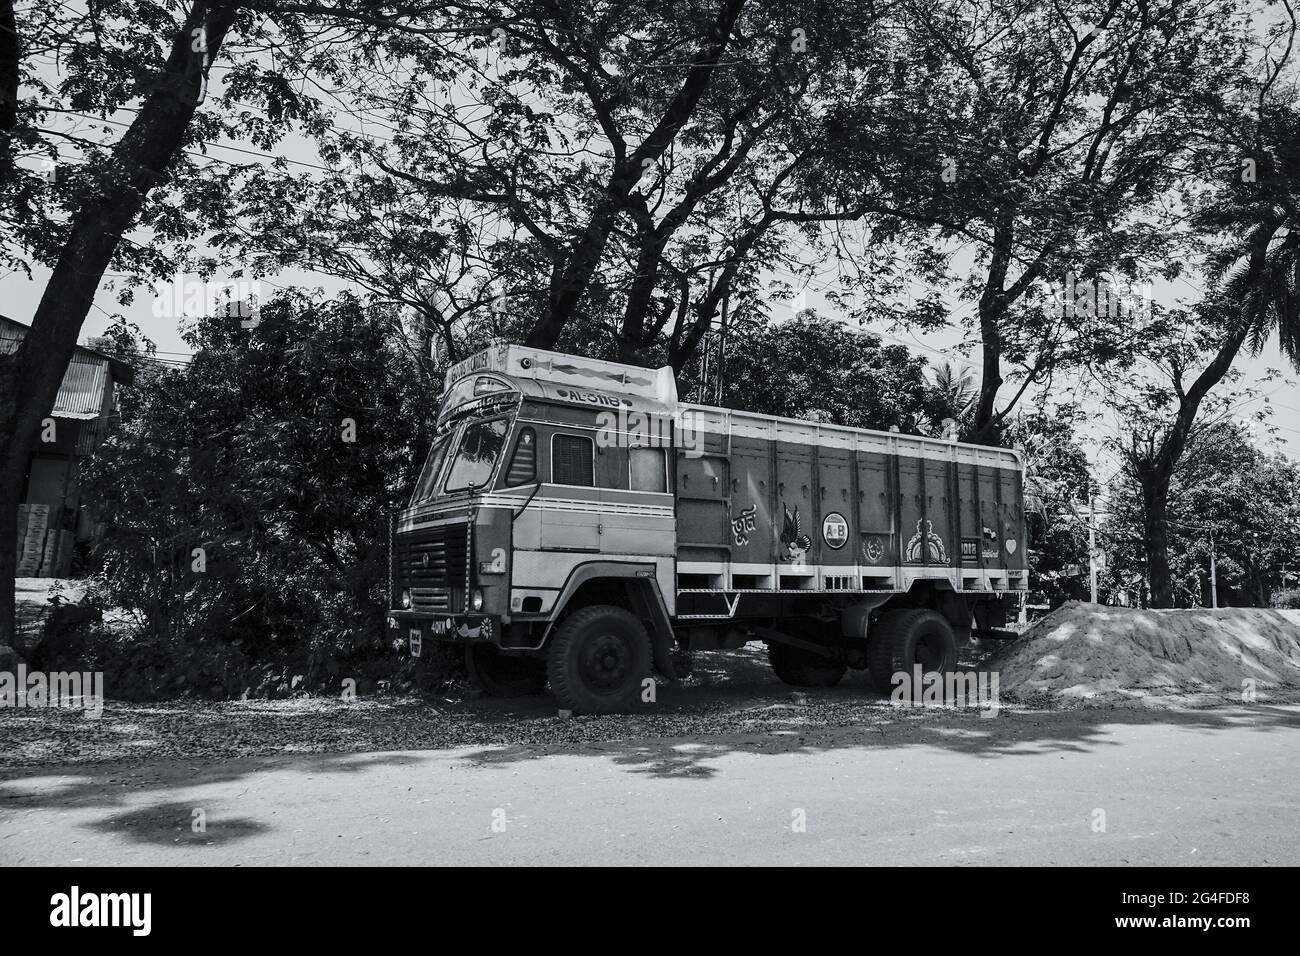 HOWRAH, WEST BENGAL, INDIA - FEBRUARY 24TH, 2018 : A goods carriage truck is carrying goods on the highway in daytime. Black and white image. Stock Photo